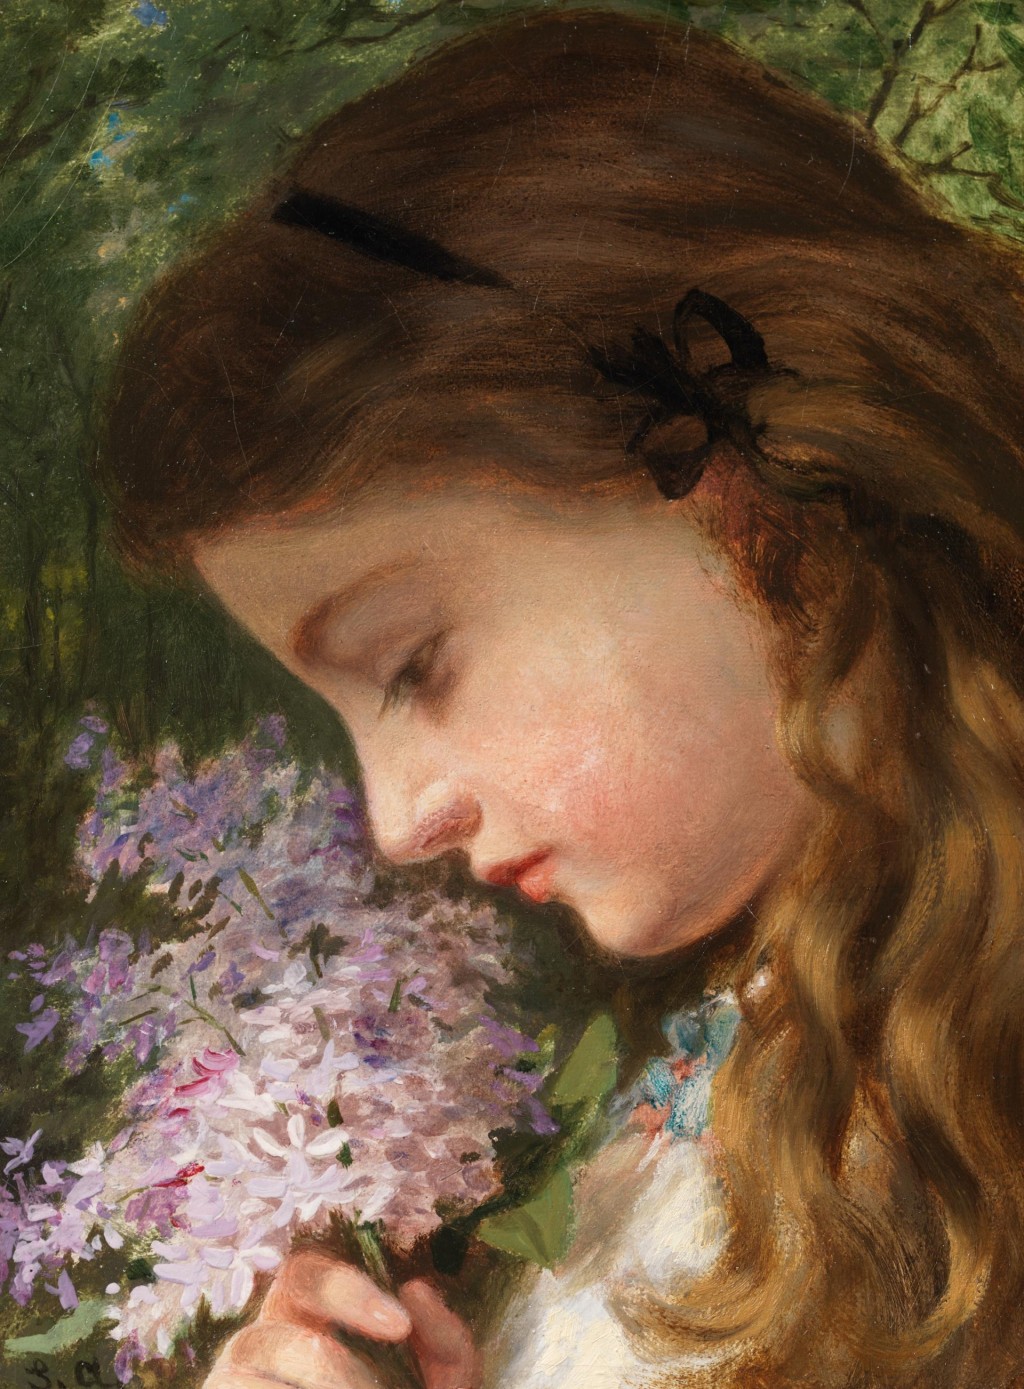 About the Artwork HD 785 5f9fcbaa16d1a021cd0af26e7ccabfa0 1024  by Sophie Anderson